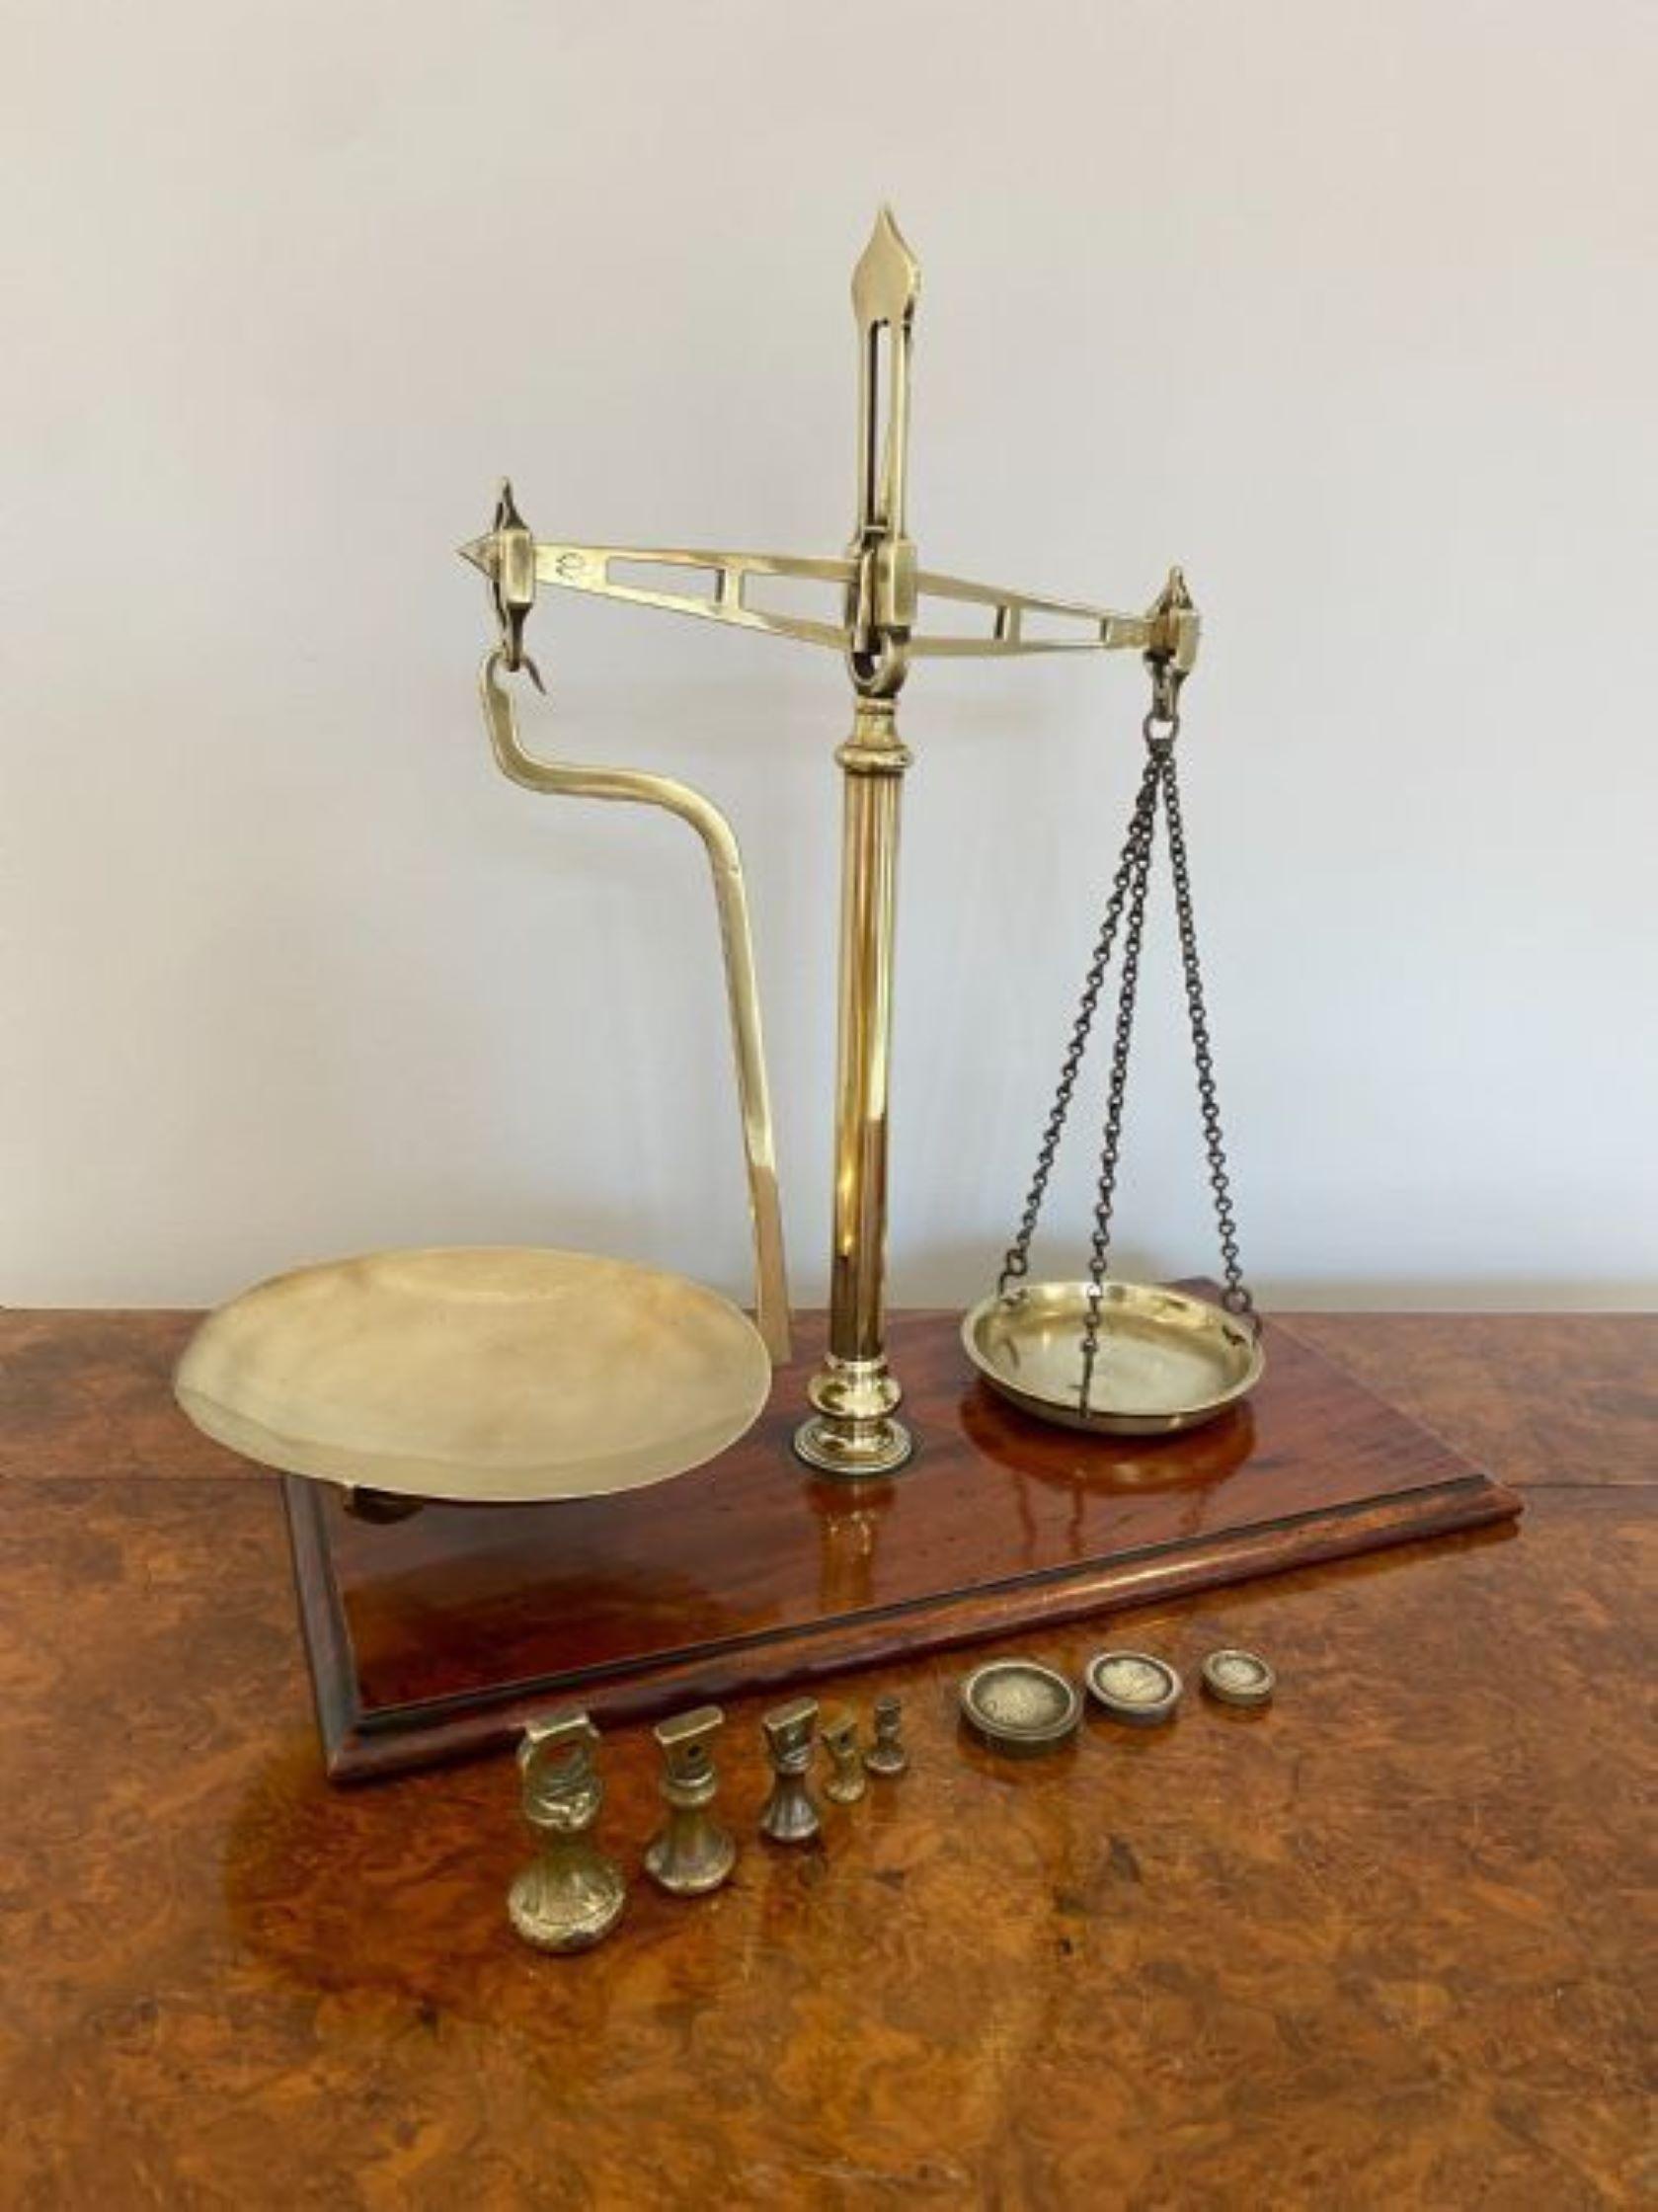 Quality pair of early Victorian 19th century Parnall & Sons of Bristol shop scales of brass construction upon a wooden mahogany base. Marked Parnell & Sons to the frame. Accompanied brass weights. 